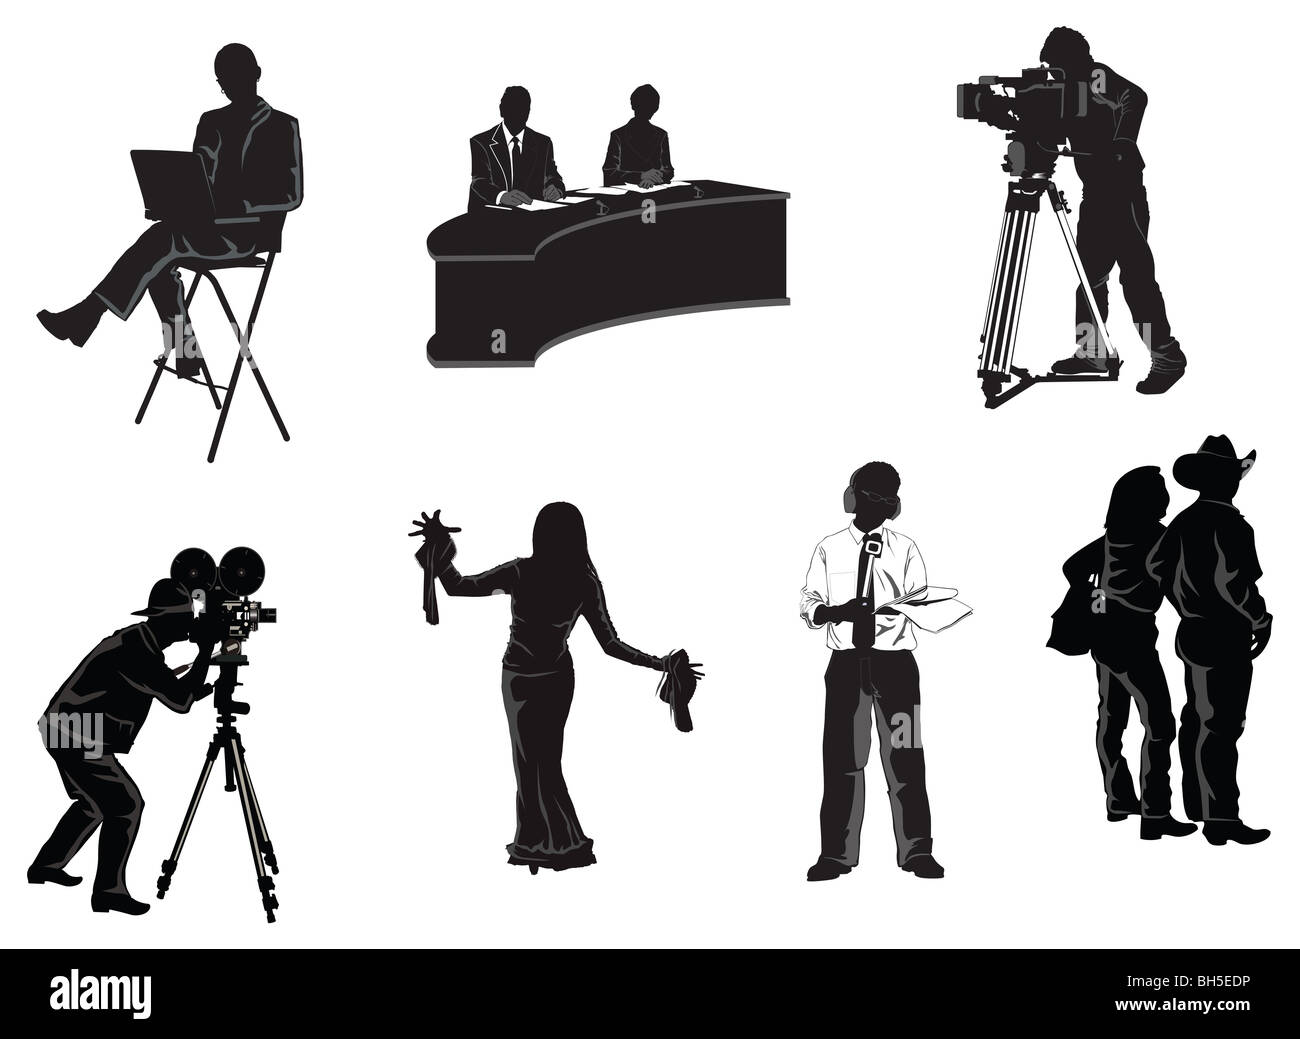 collection of humans associated with film and media industry Stock Photo